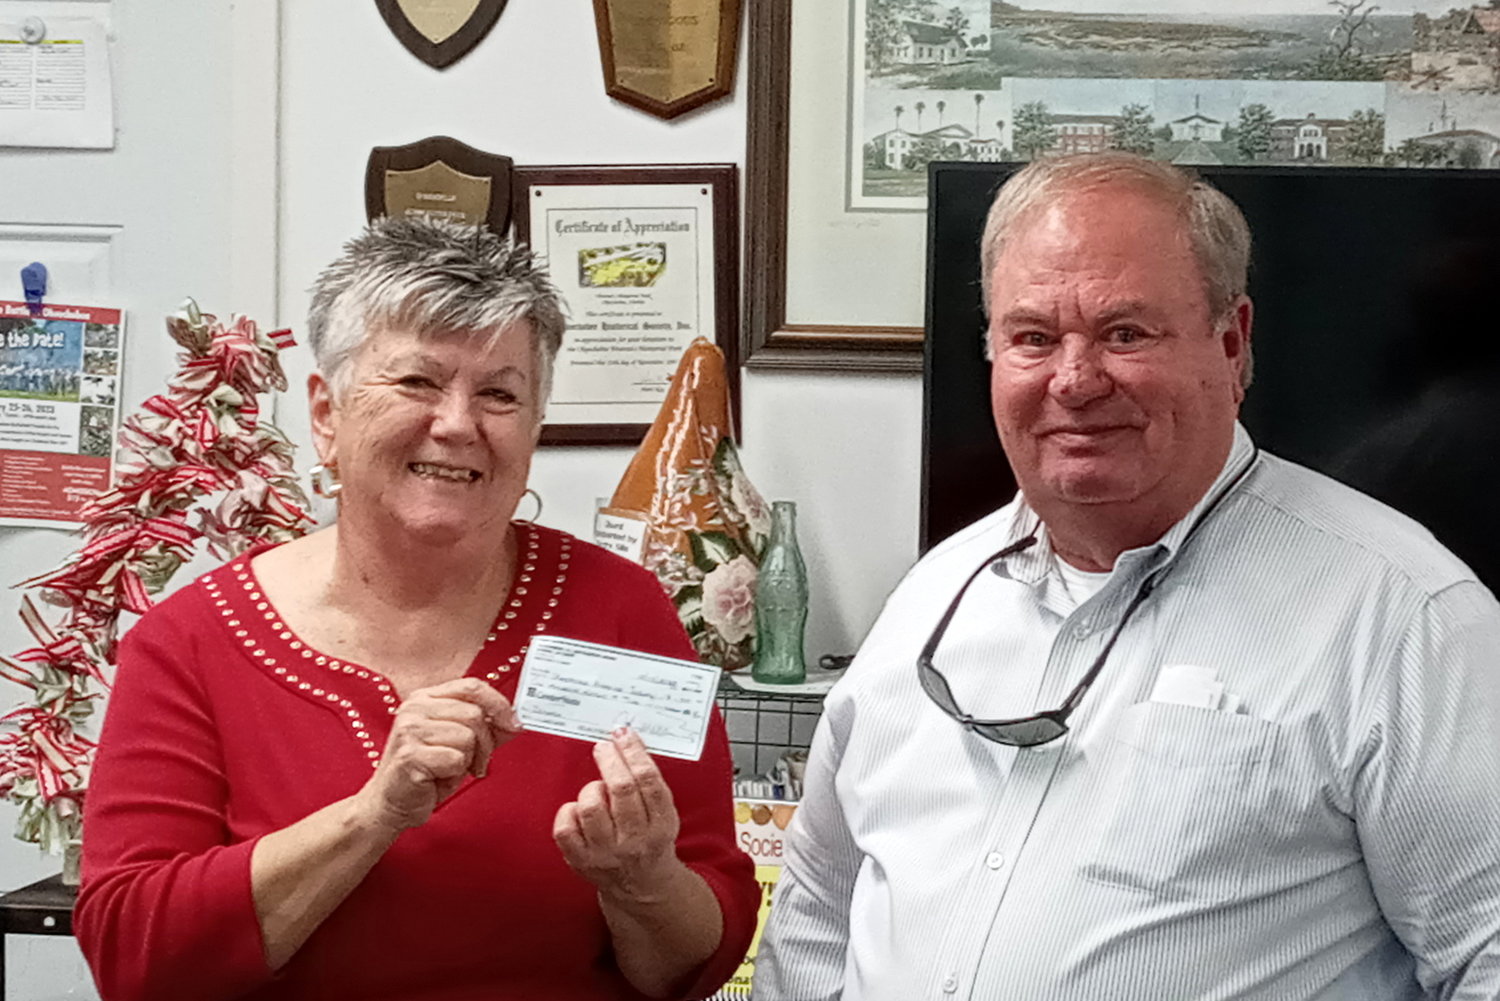 Magi Cable accepts a $1,000 check from John Williams, representative of the Okeechobee Cattlemen’s Association to be used in the development of an agriculture museum.